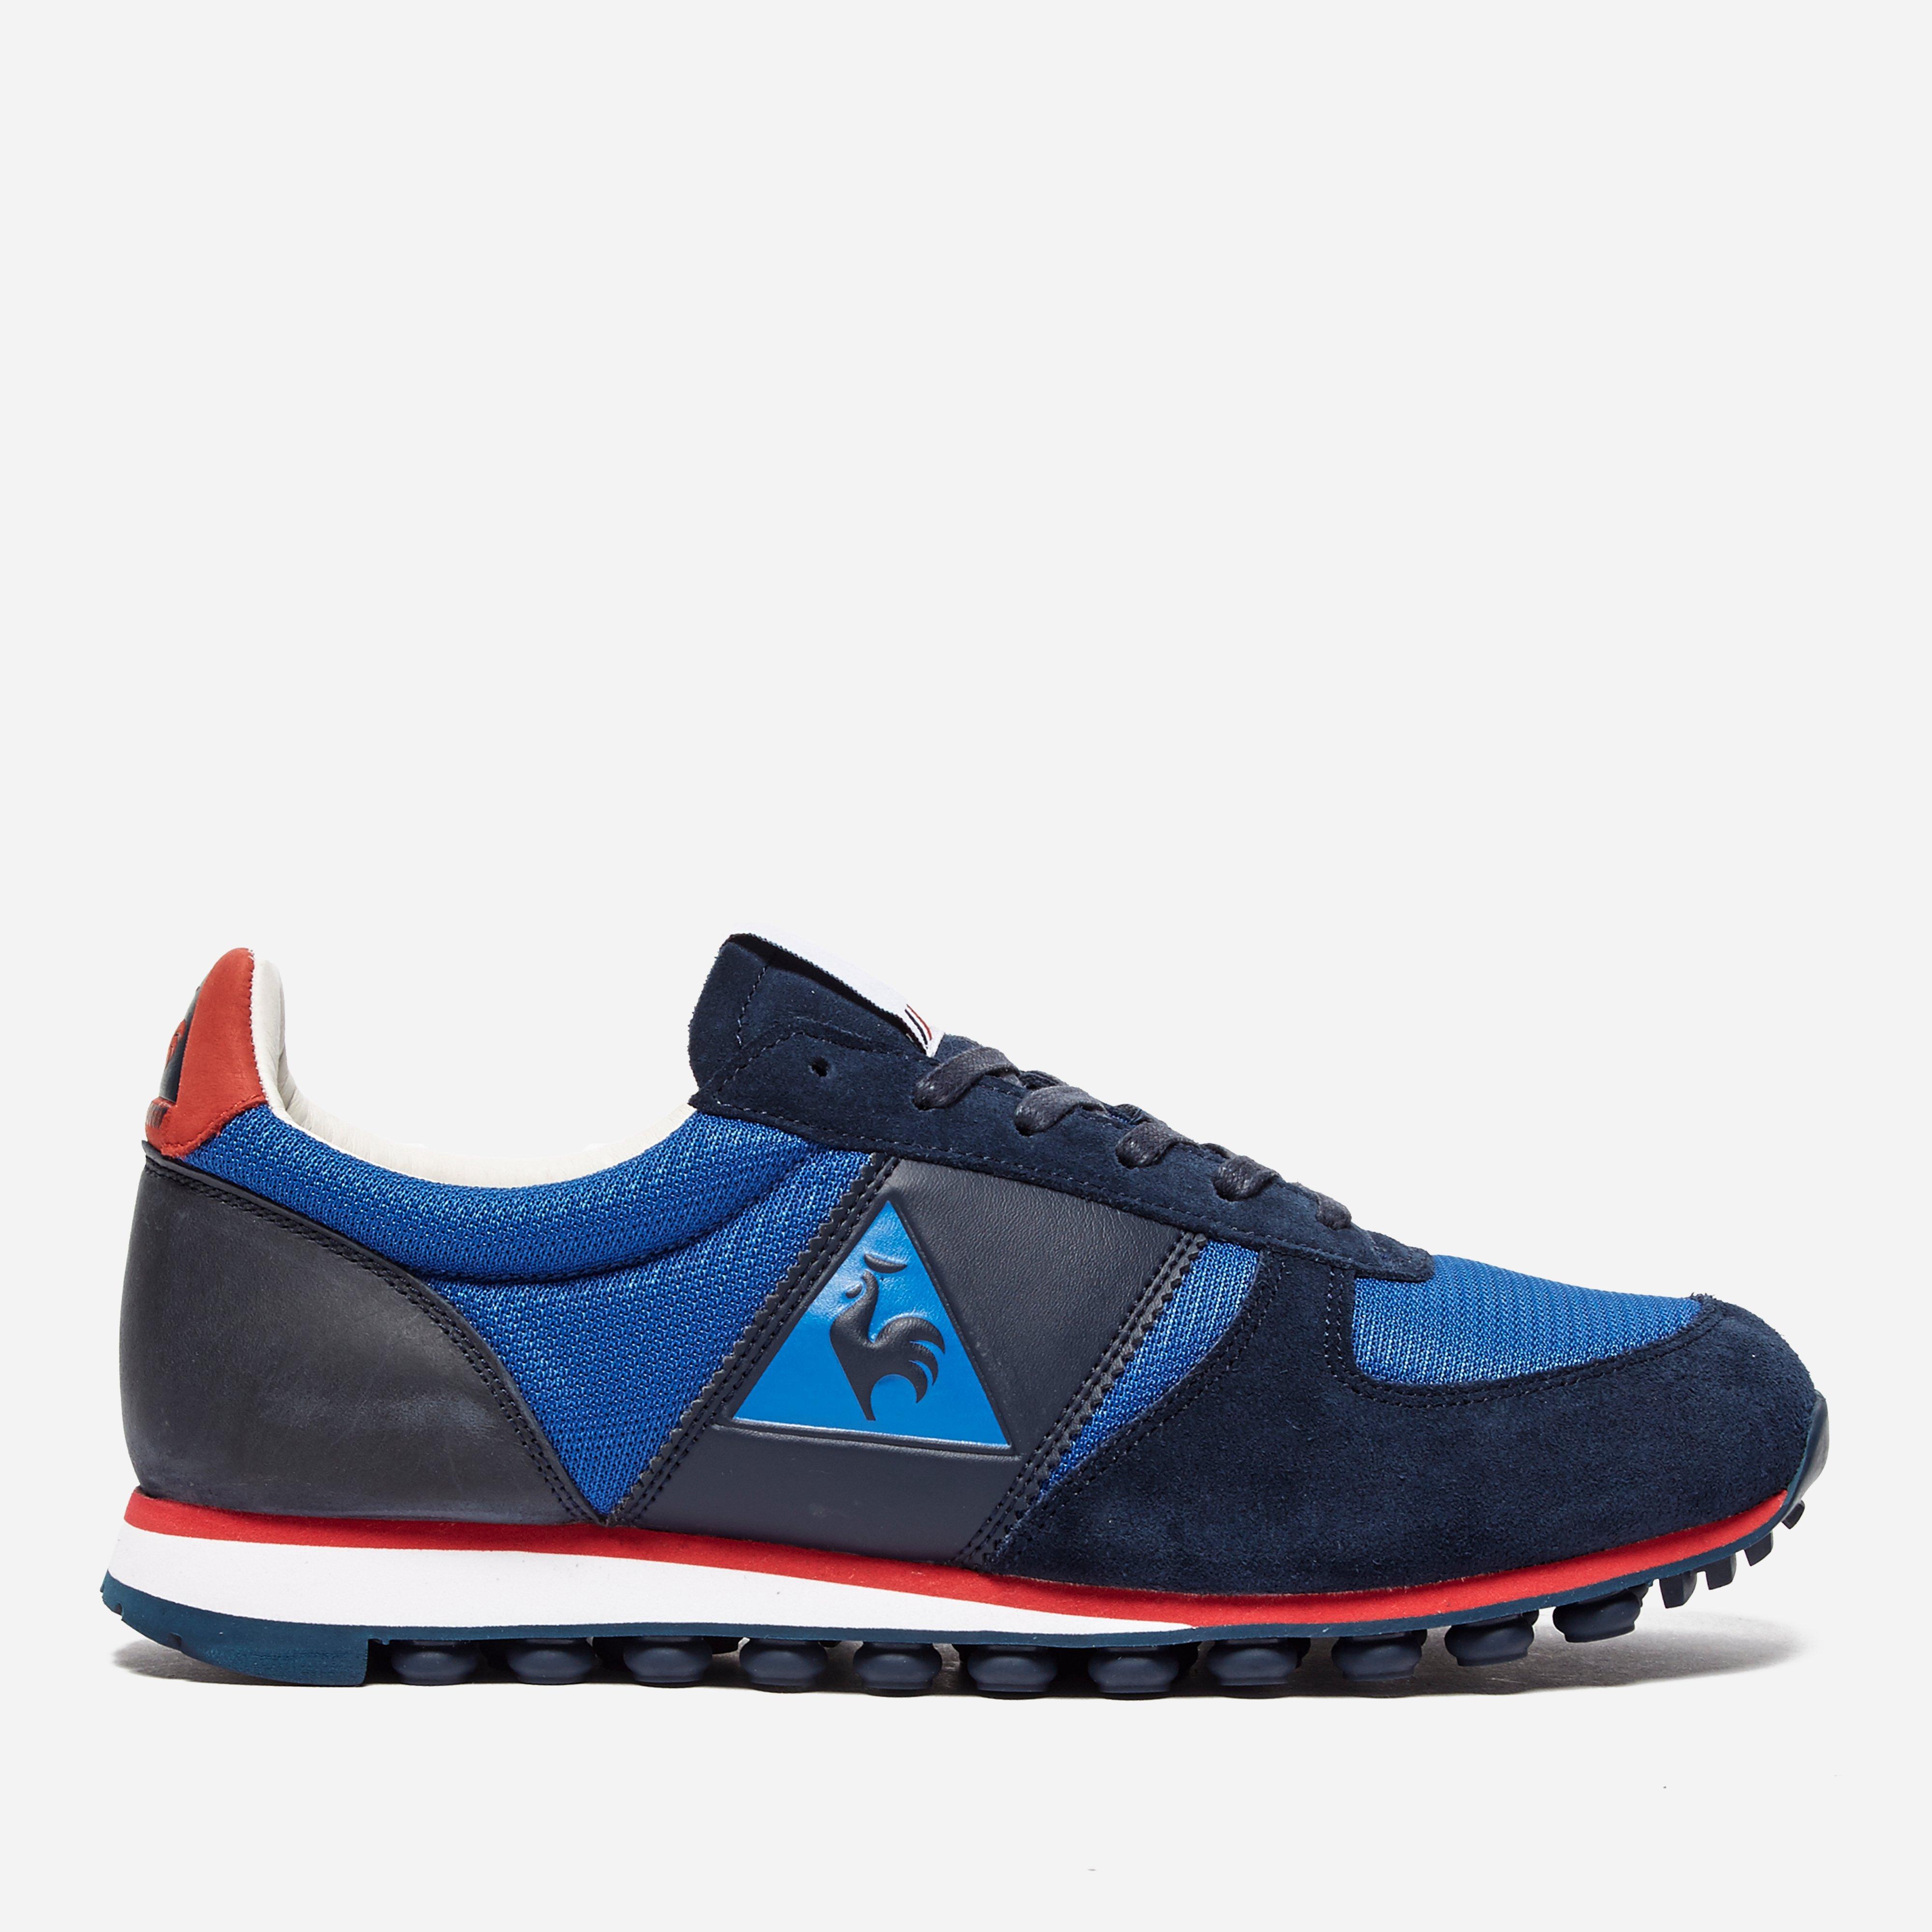 Le Coq Sportif Suede Turbostyle Bbr in Navy (Blue) for Men - Lyst